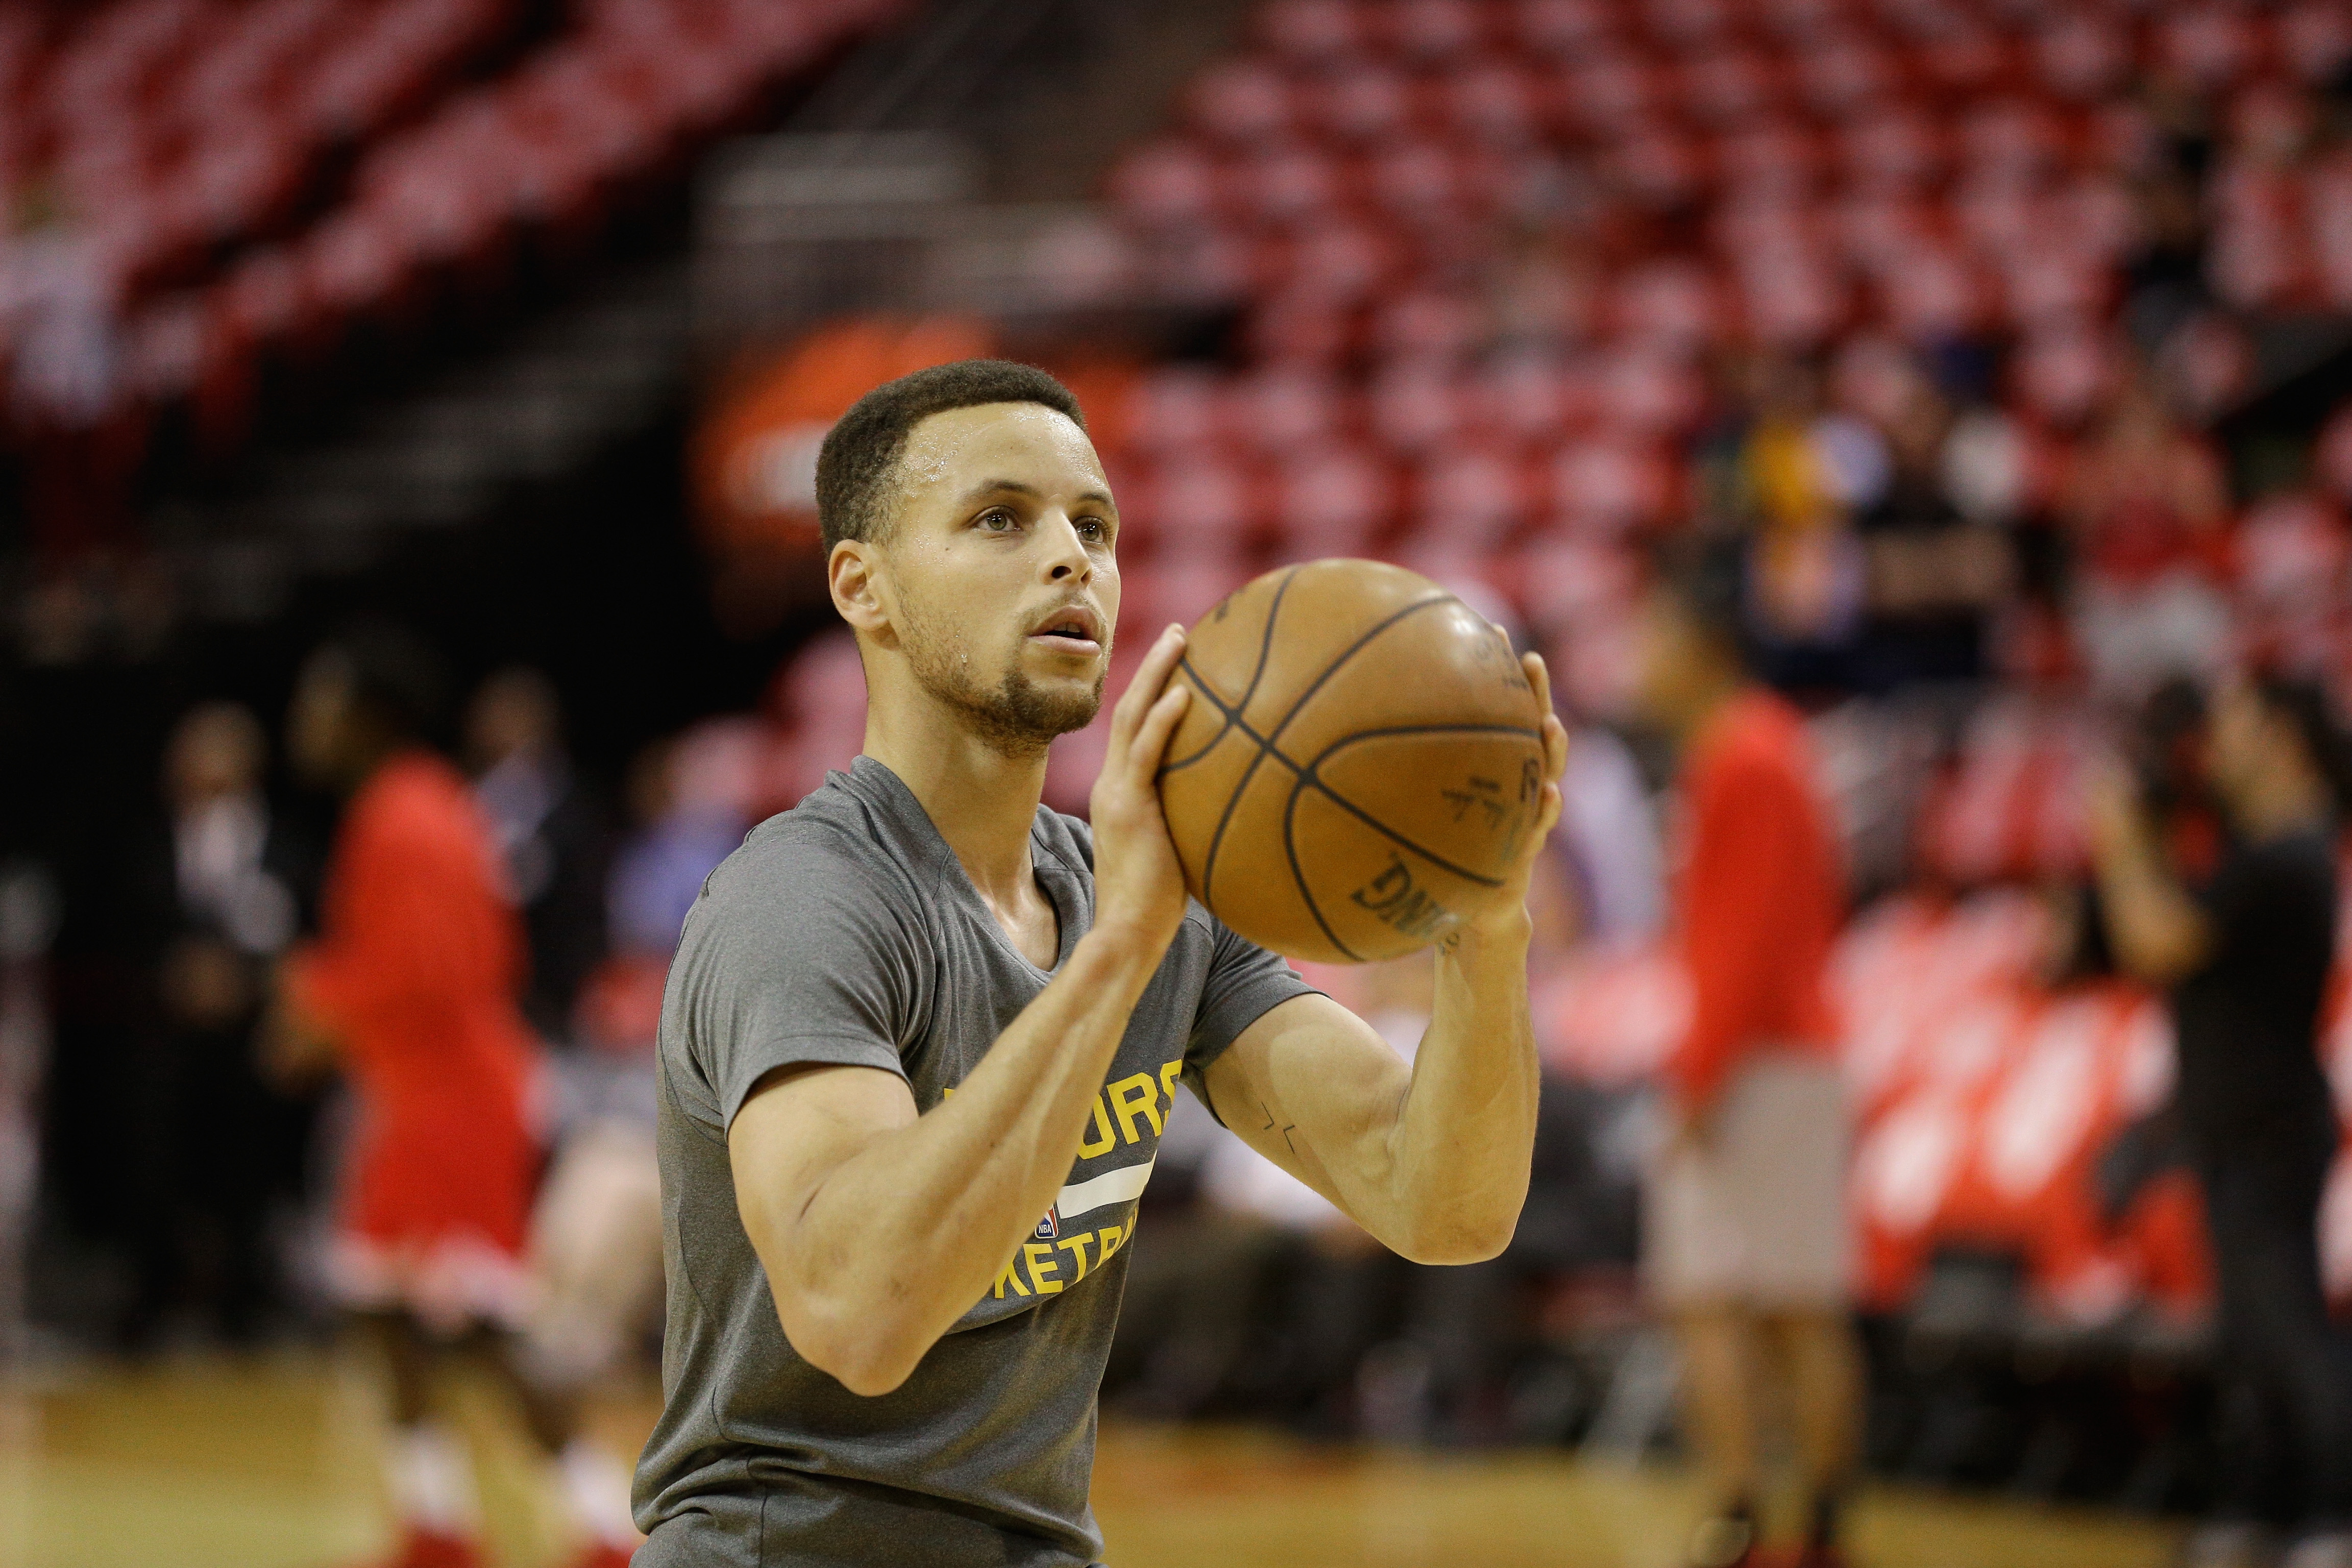 Stephen Curry #30 of the Golden State Warriors warms up before playing the Houston Rockets in game 4 of the first round of the Western Conference playoffs at Toyota Center on April 24, 2016 in Houston, Texas. (Bob Levey/Getty Images)